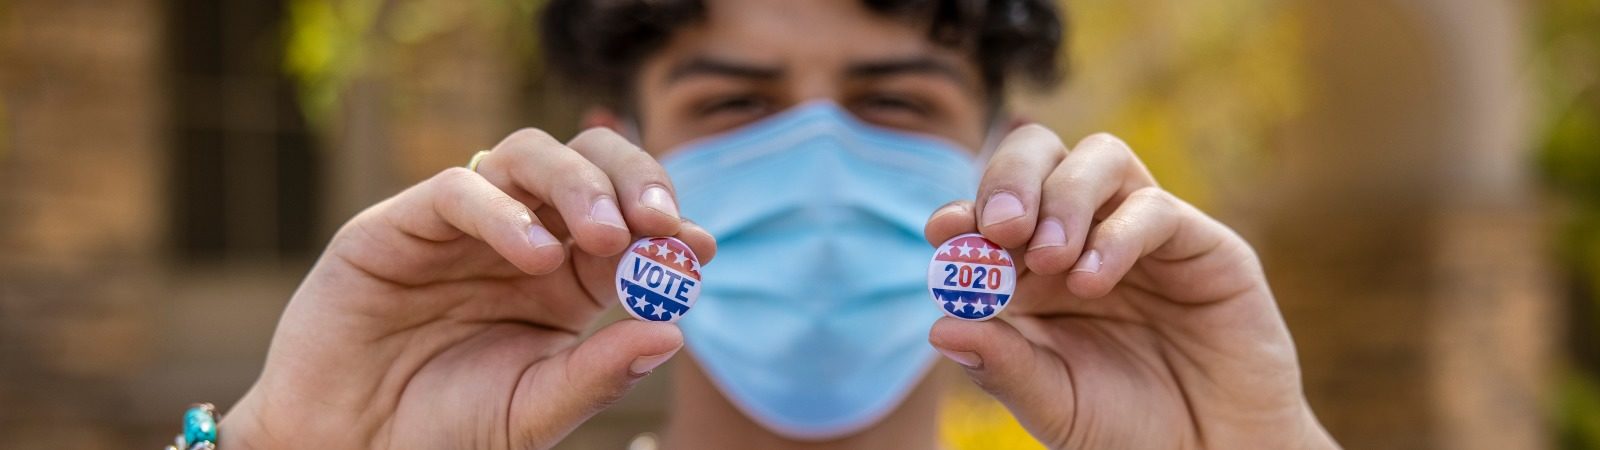 Masked teenager holding up two pins that say VOTE and 2020